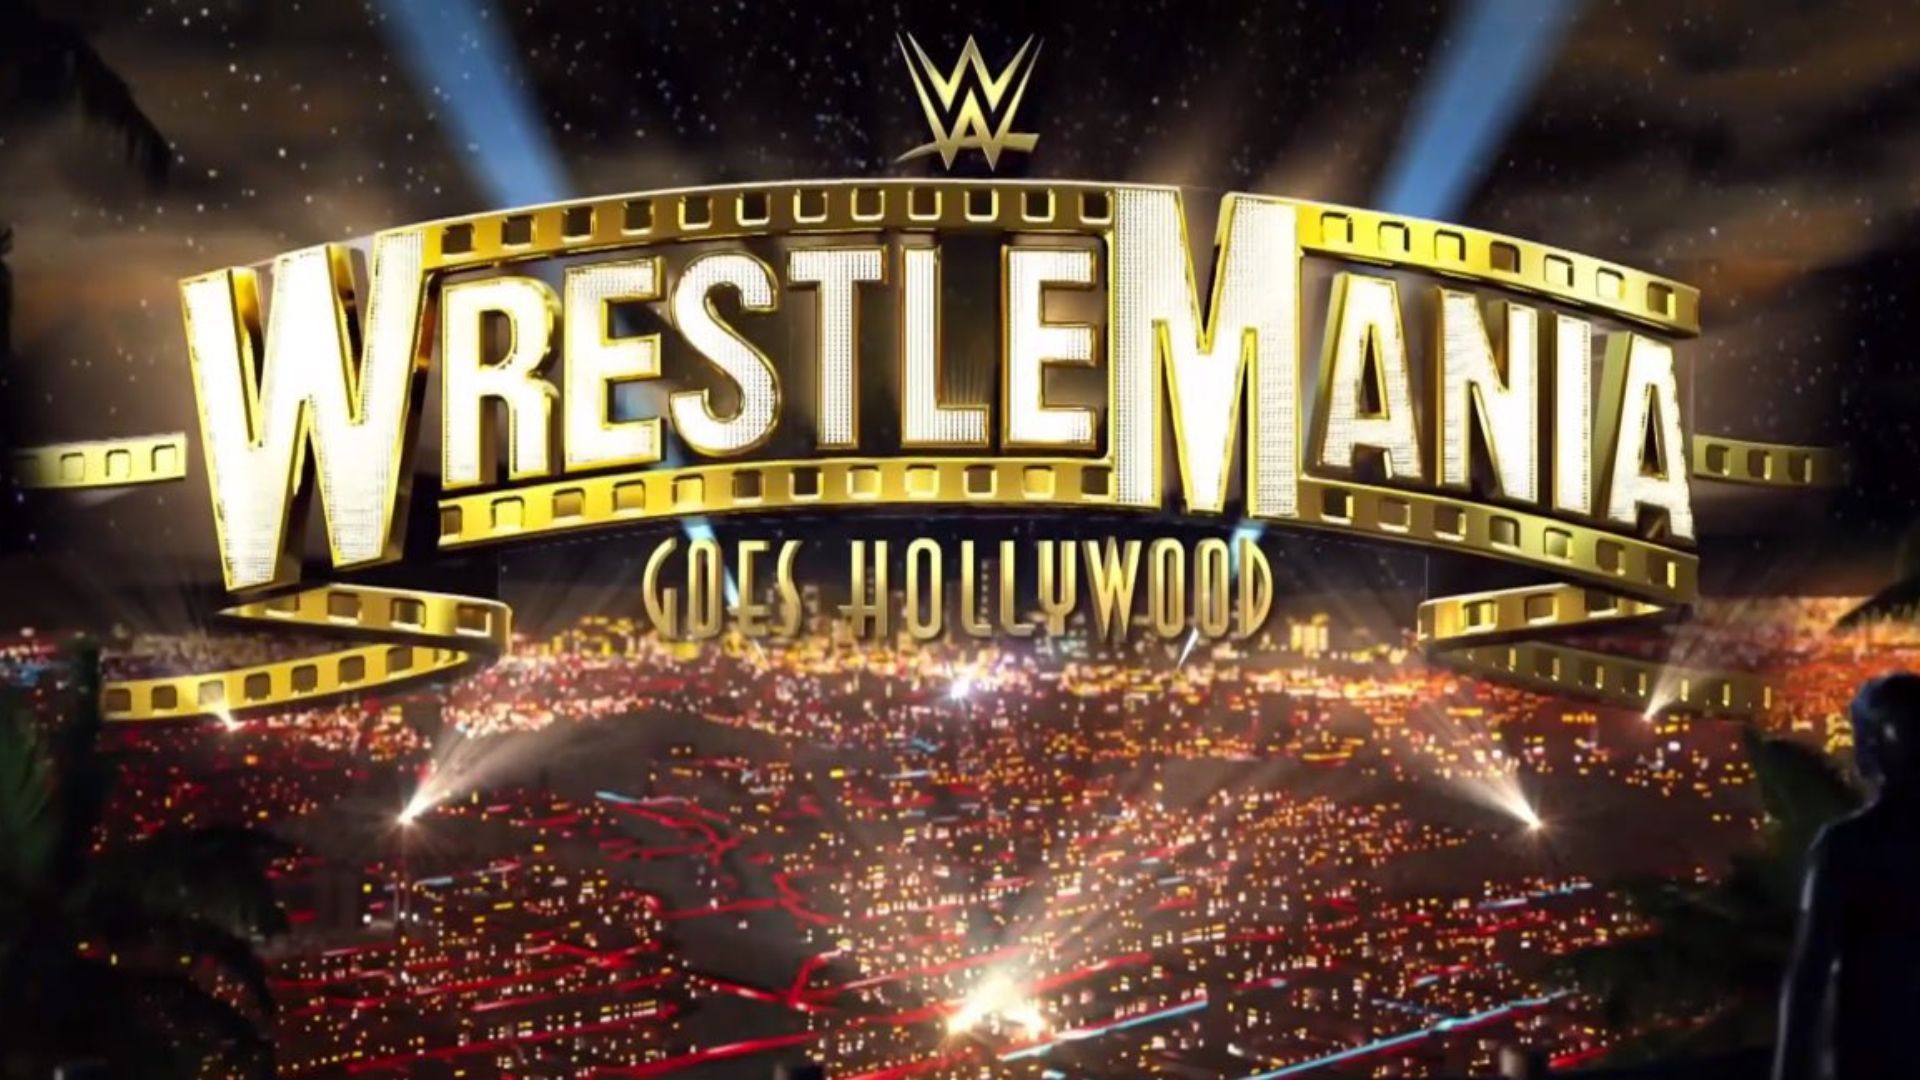 WWE WrestleMania 39 is going to be a grand extravaganza